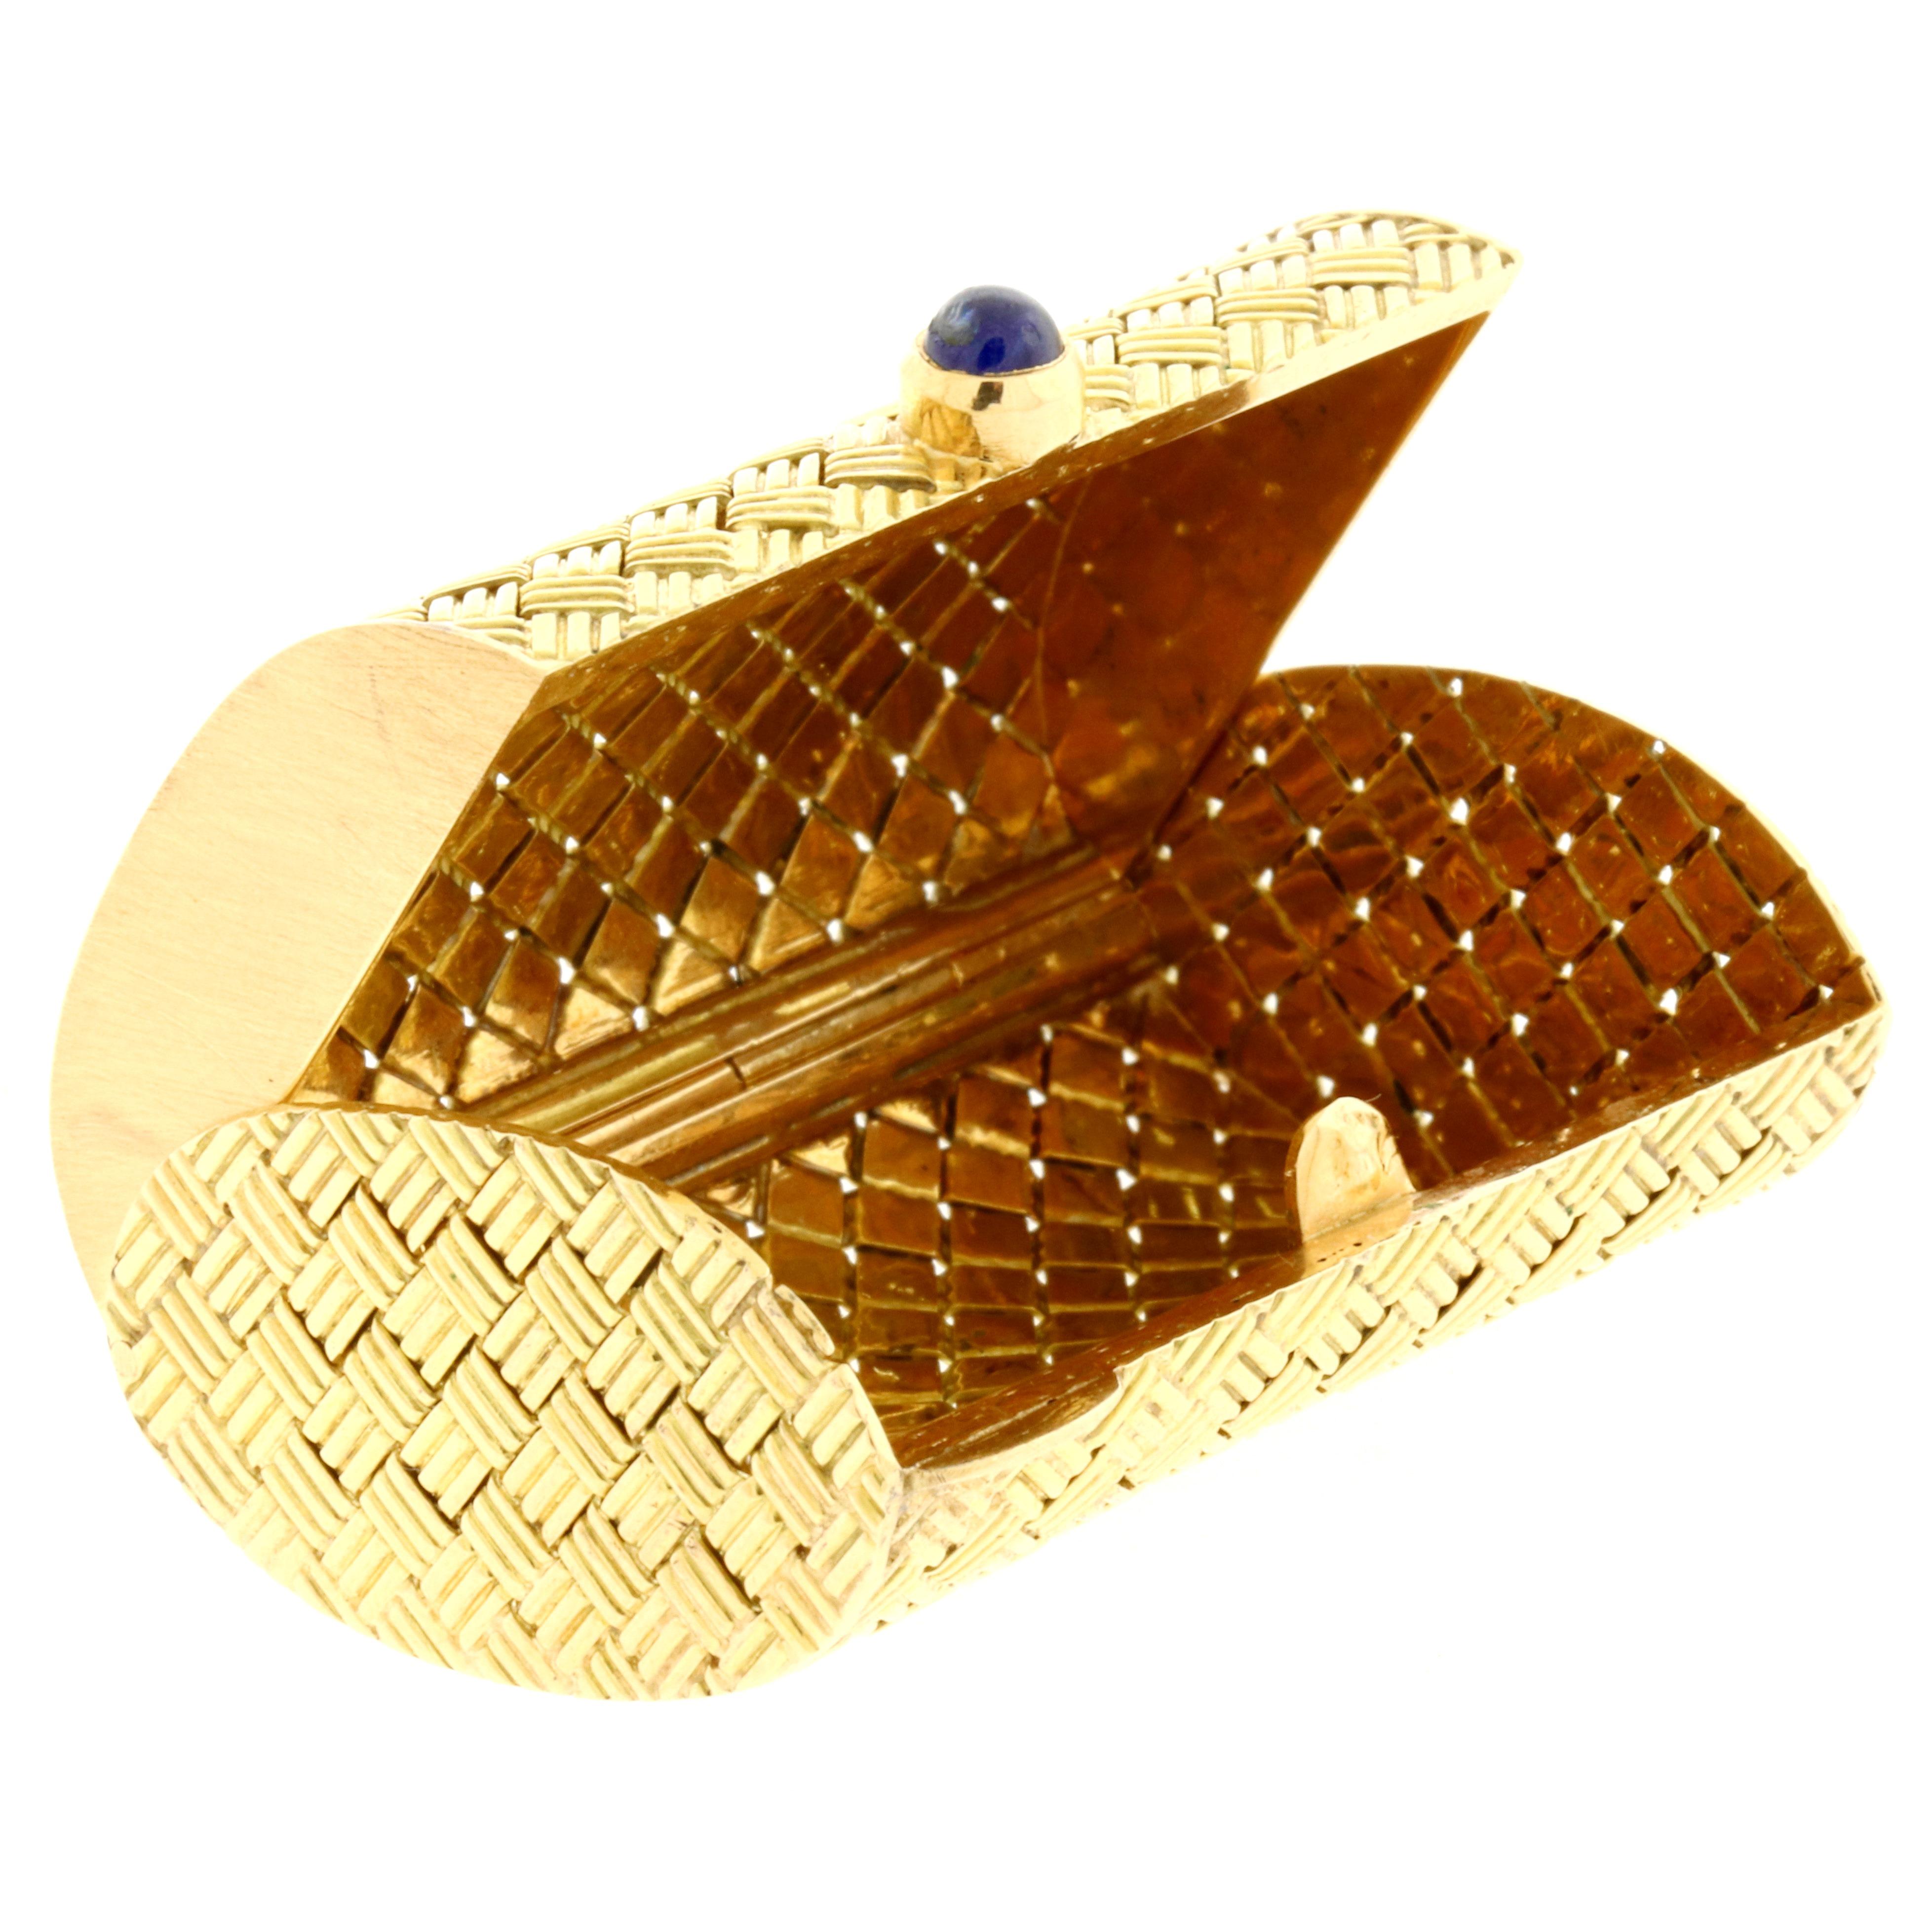 This amazing 14K yellow gold and sapphire cabochon pill box features an elegant basket weave design and was crafted with impeccable quality. Beautiful workmanship, flawless functionality and ever so eye catching; this iconic design was typically